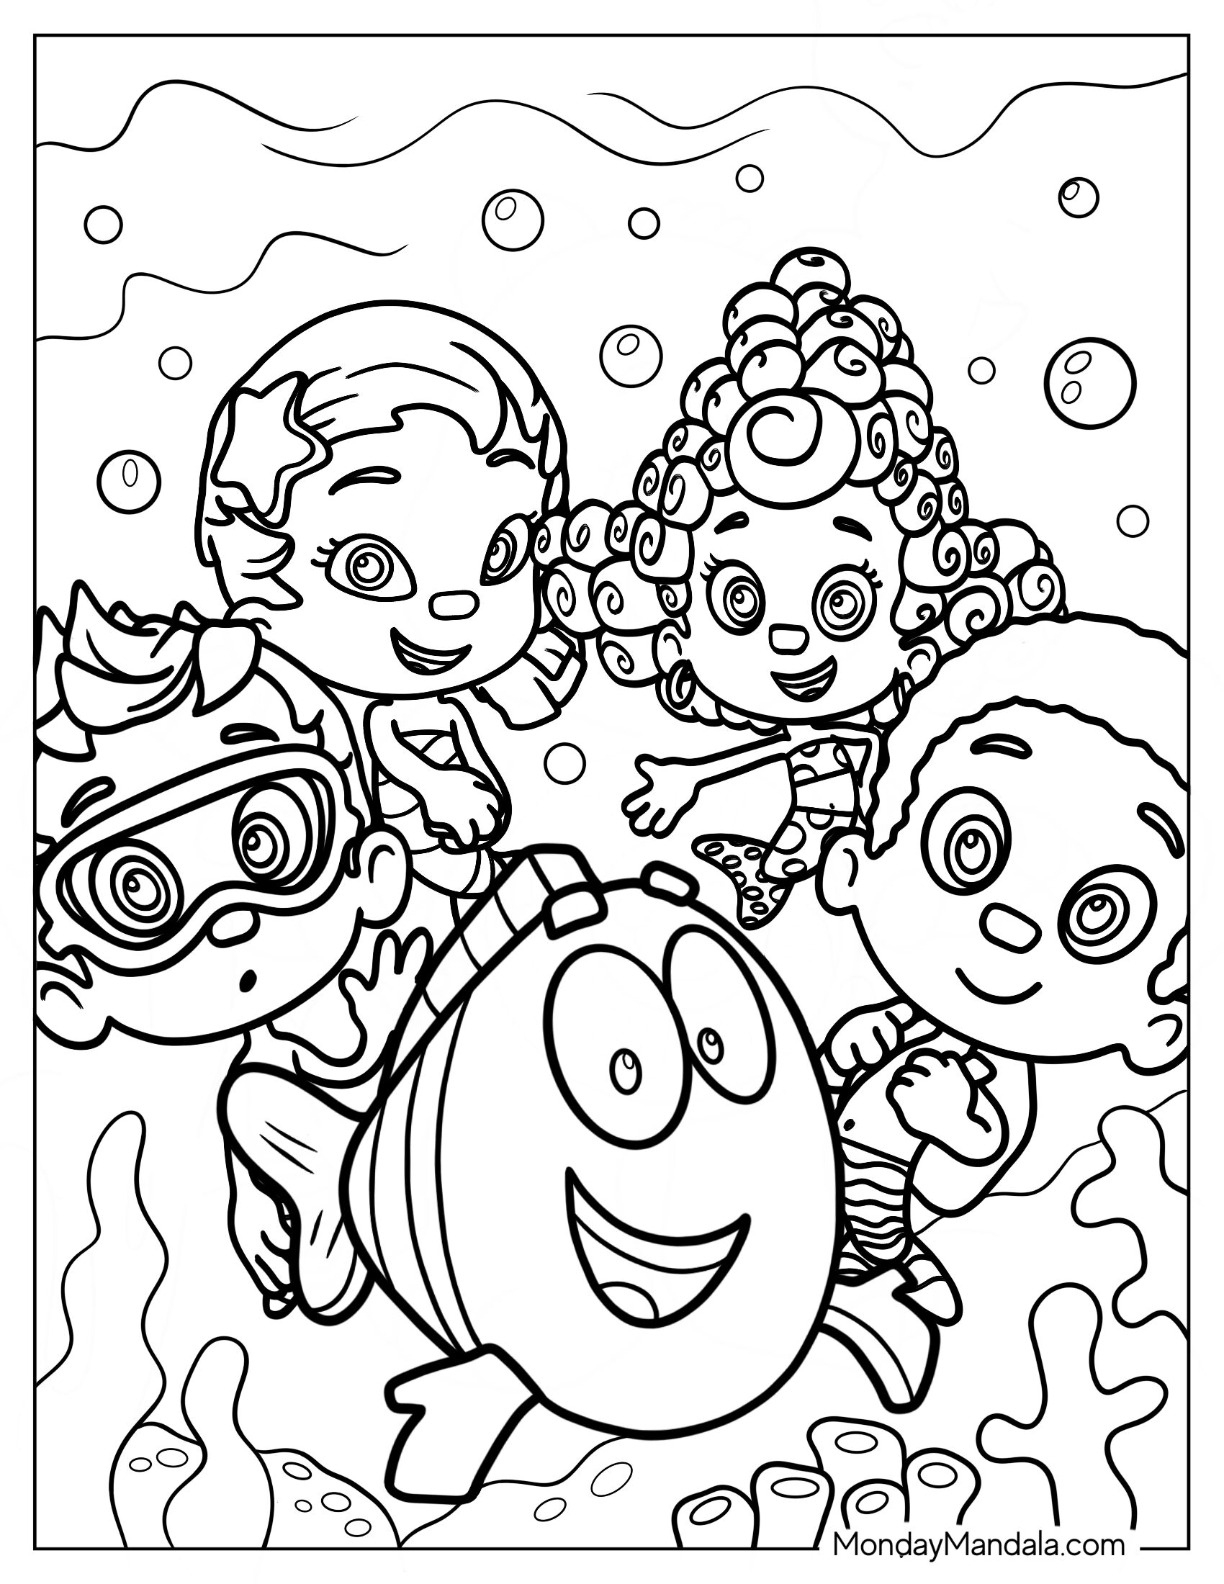 22 Bubble Guppies Coloring Pages (Free Pdf Printables) intended for Bubble Guppies Free Printables